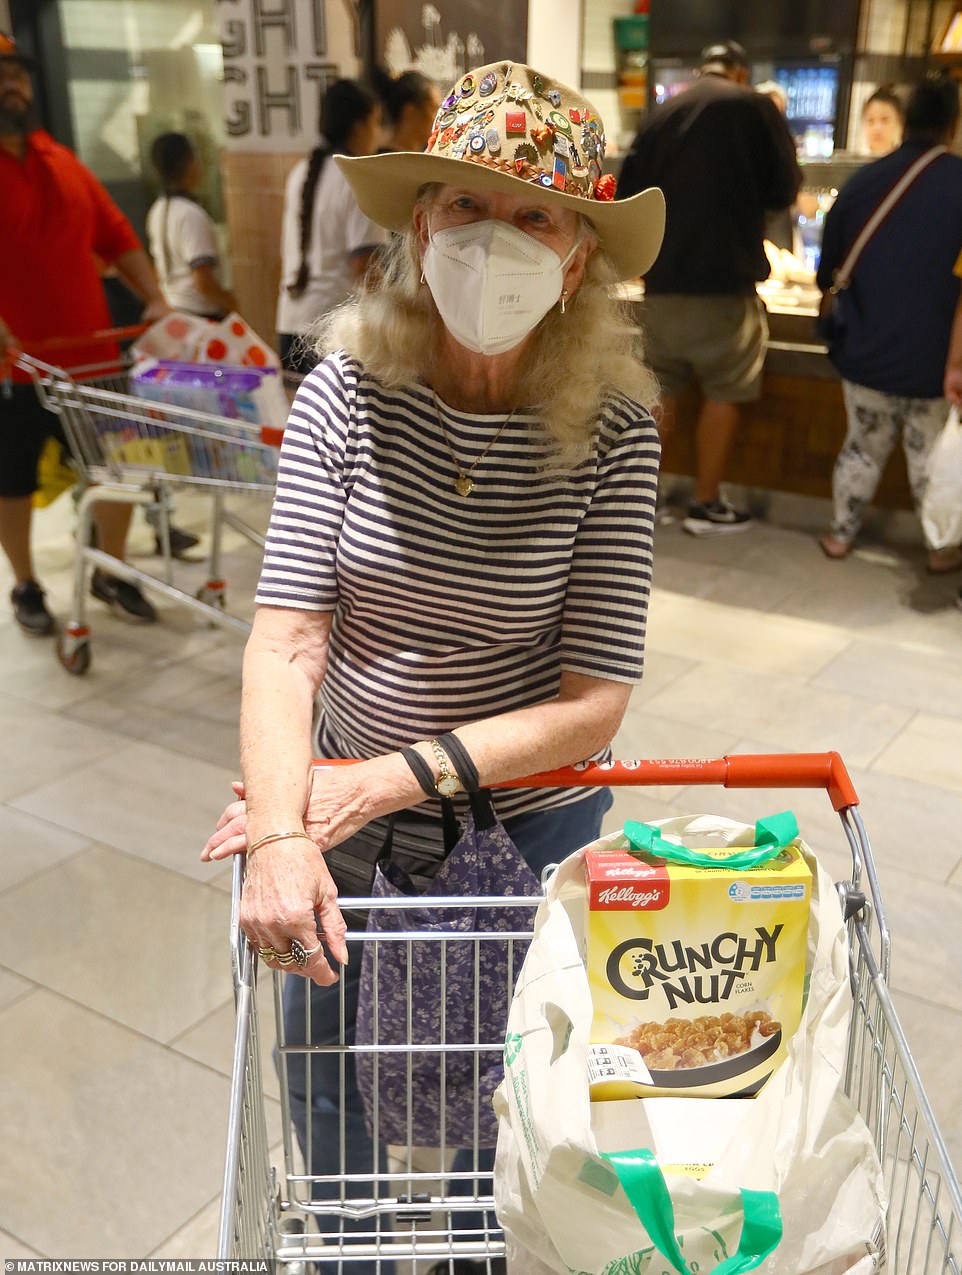 Margaret, an aged pensioner, said she shops around to make her money stretch for groceries